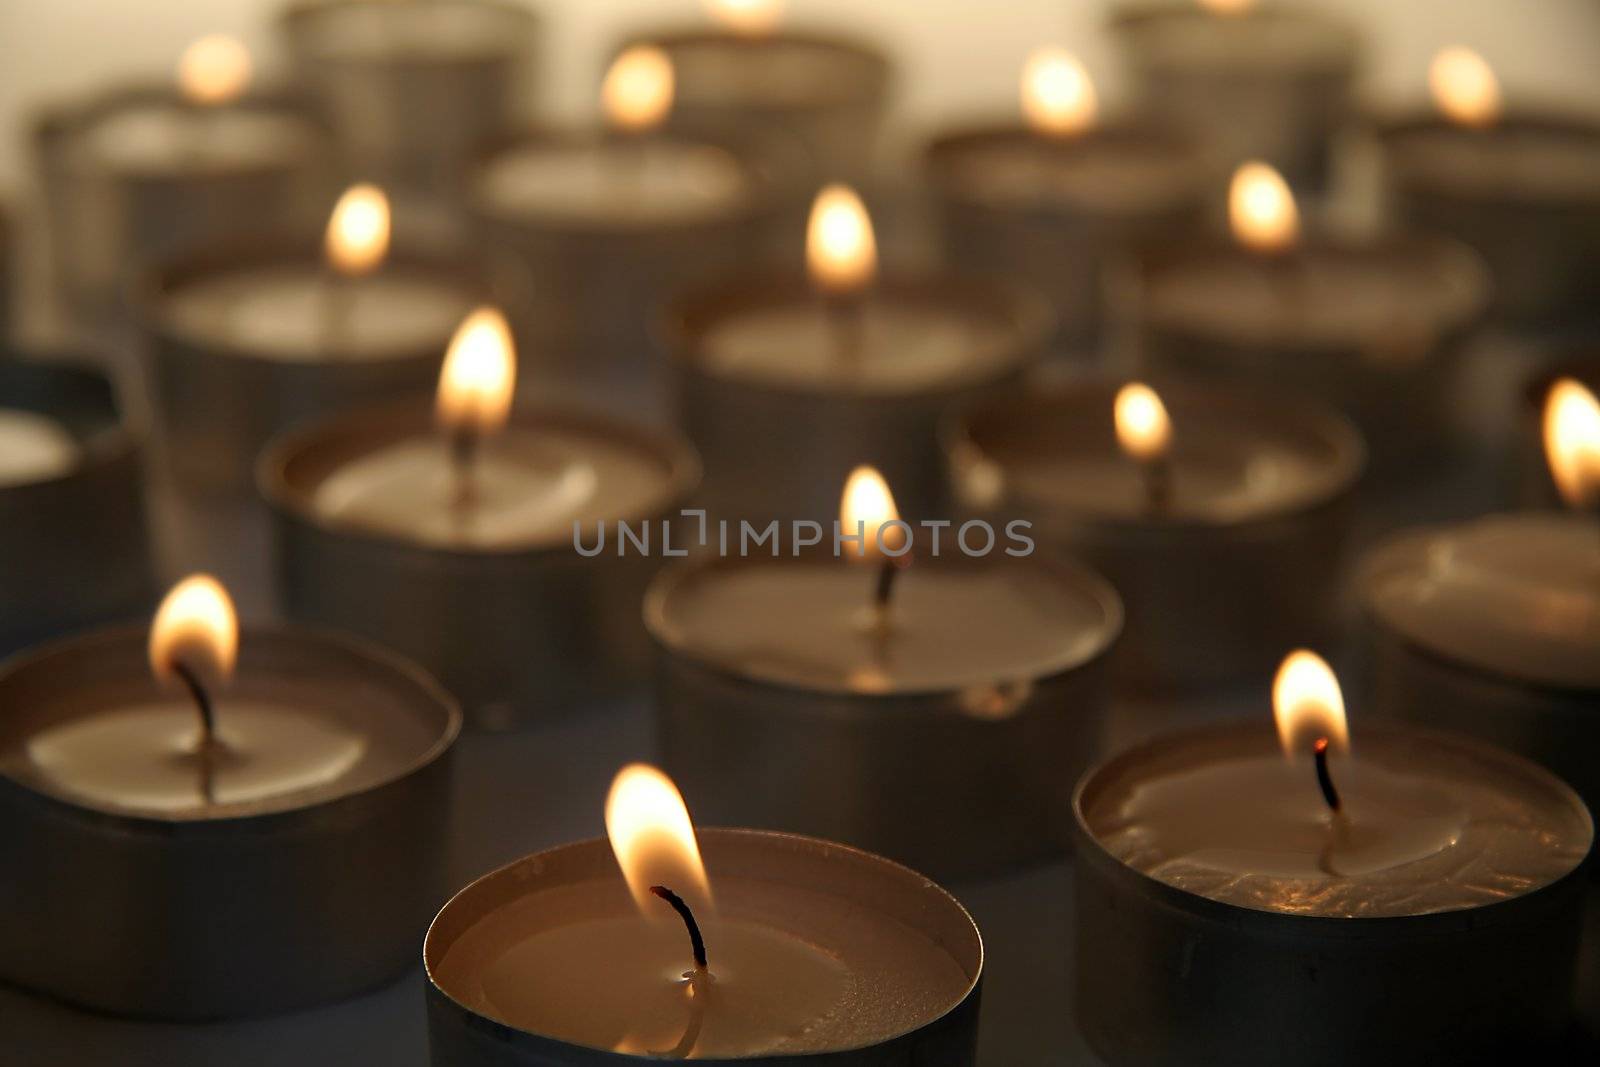 several burning candles, distance blur, warm brown color